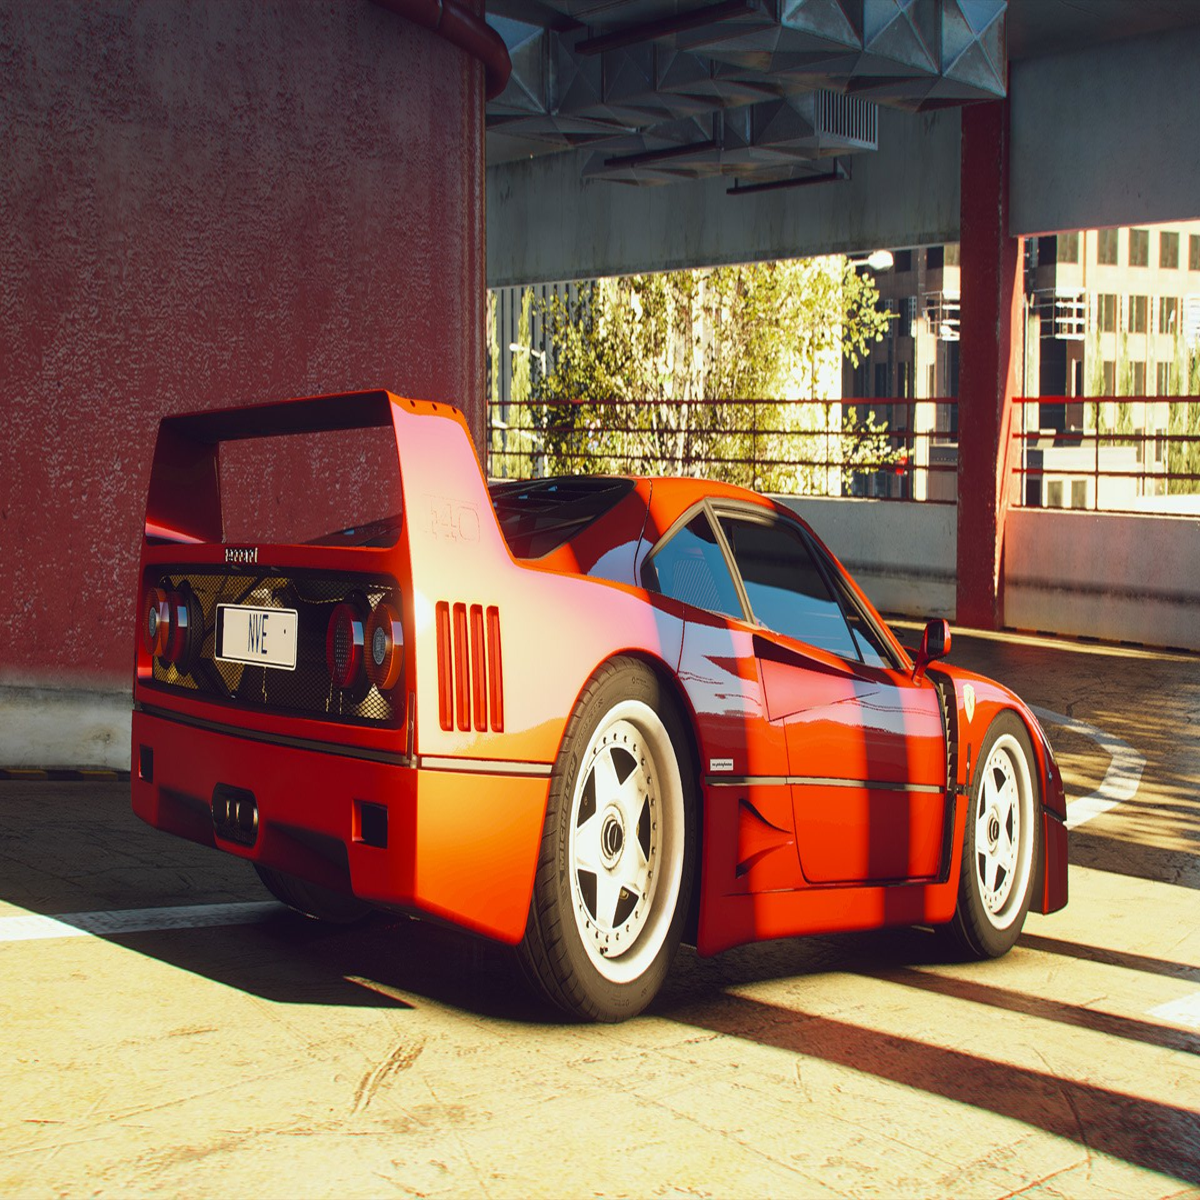 GTA V modified with 8K textures and Ray Tracing, crazy video